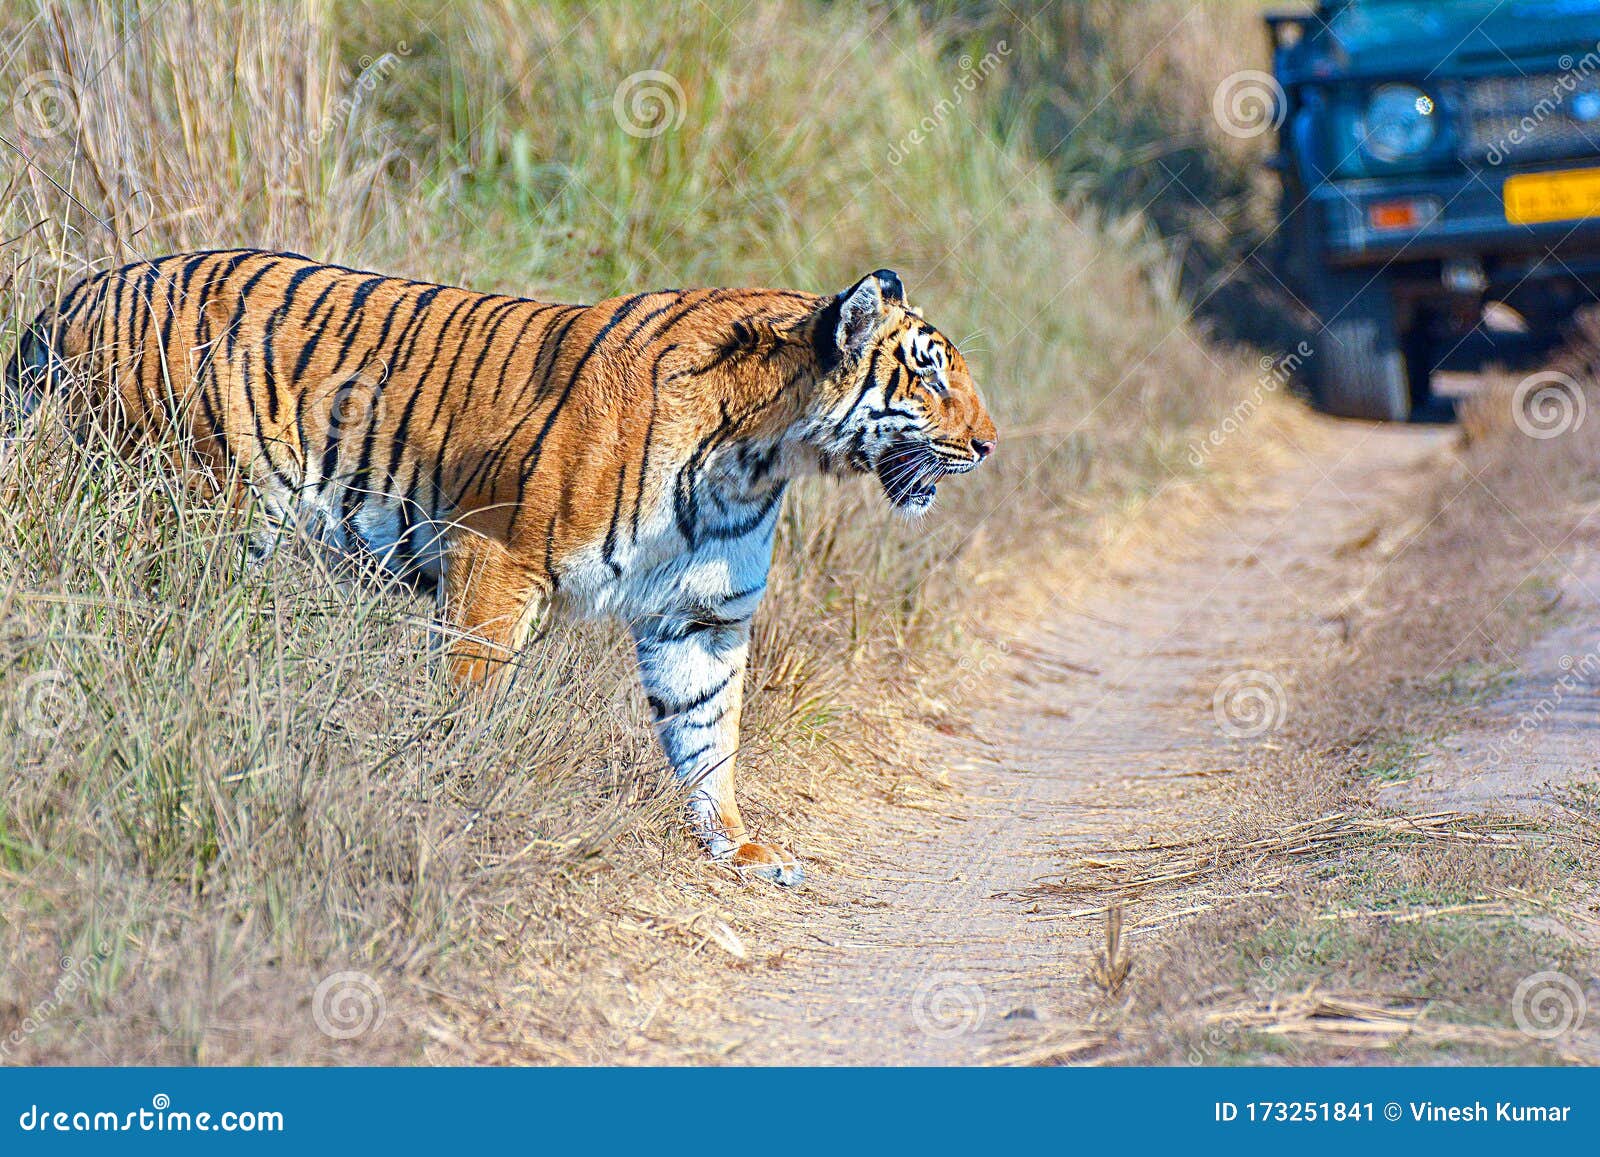 wild tiger: panthera tigris crossing trail during safari at the forest of jim corbett